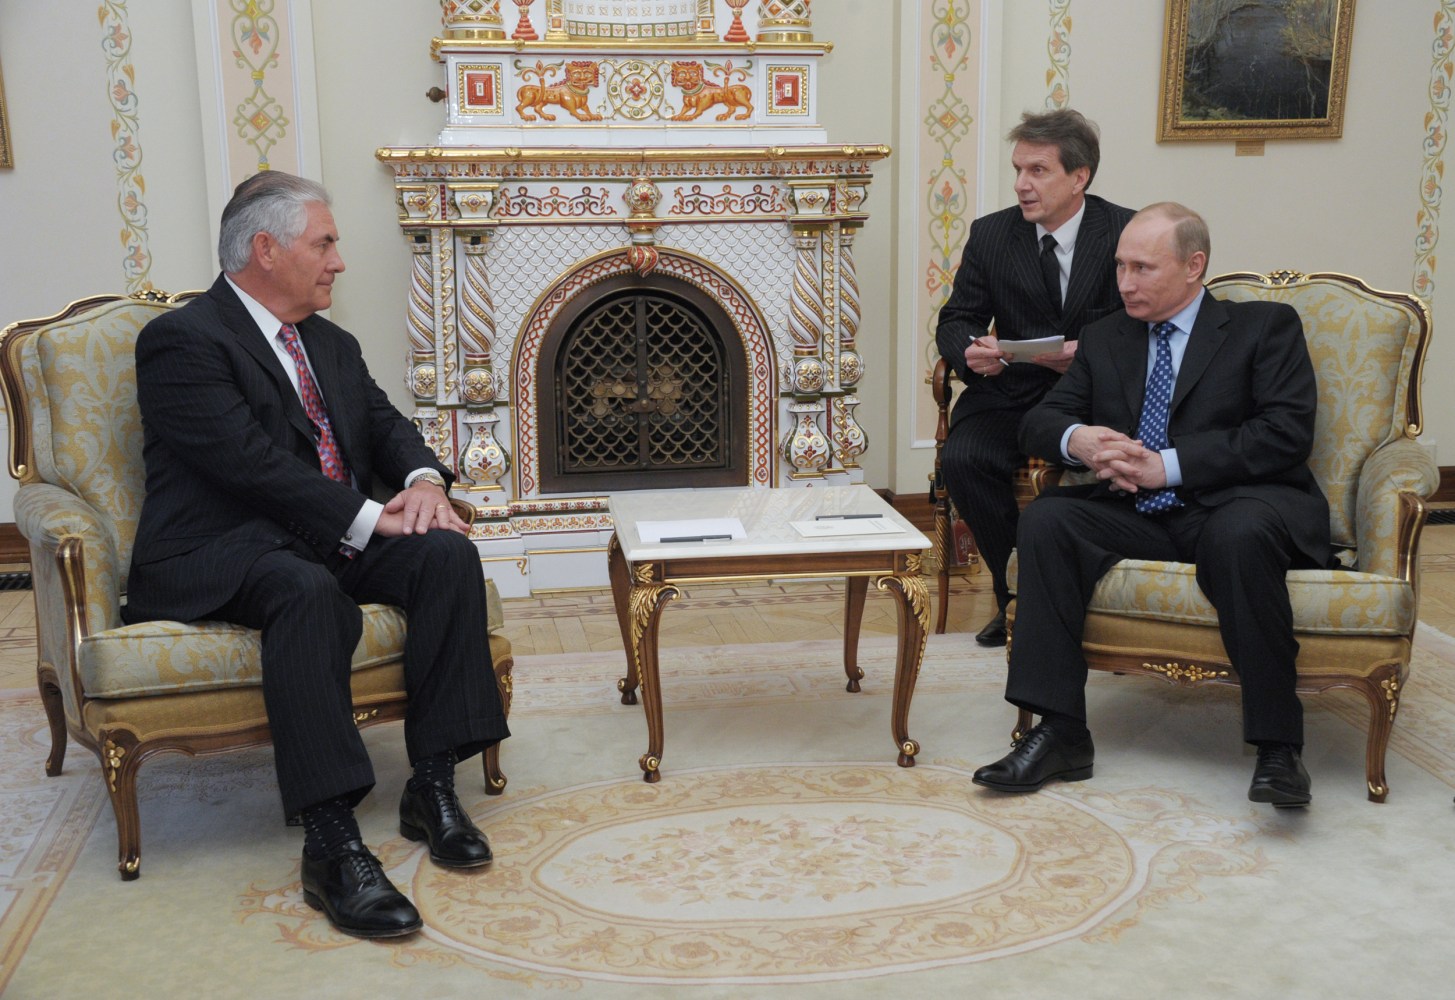 Image result for PHOTOS OF PRESIDENT TRUMP/ REX TILLERSON WITH RUSSIANS AT WHITE HOUSE